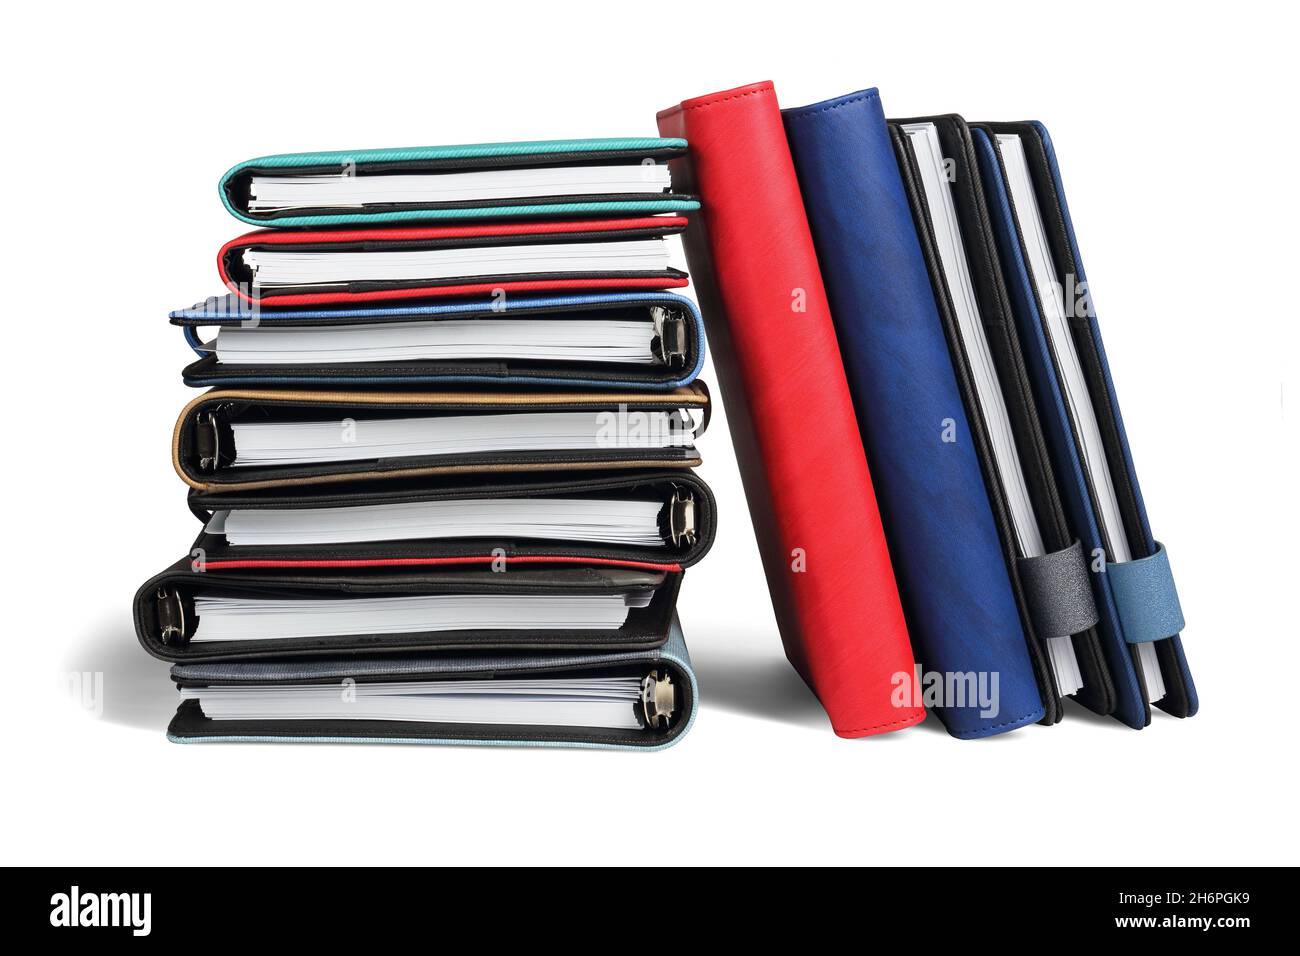 Collection of Colorful Diaries on White Background Stock Photo